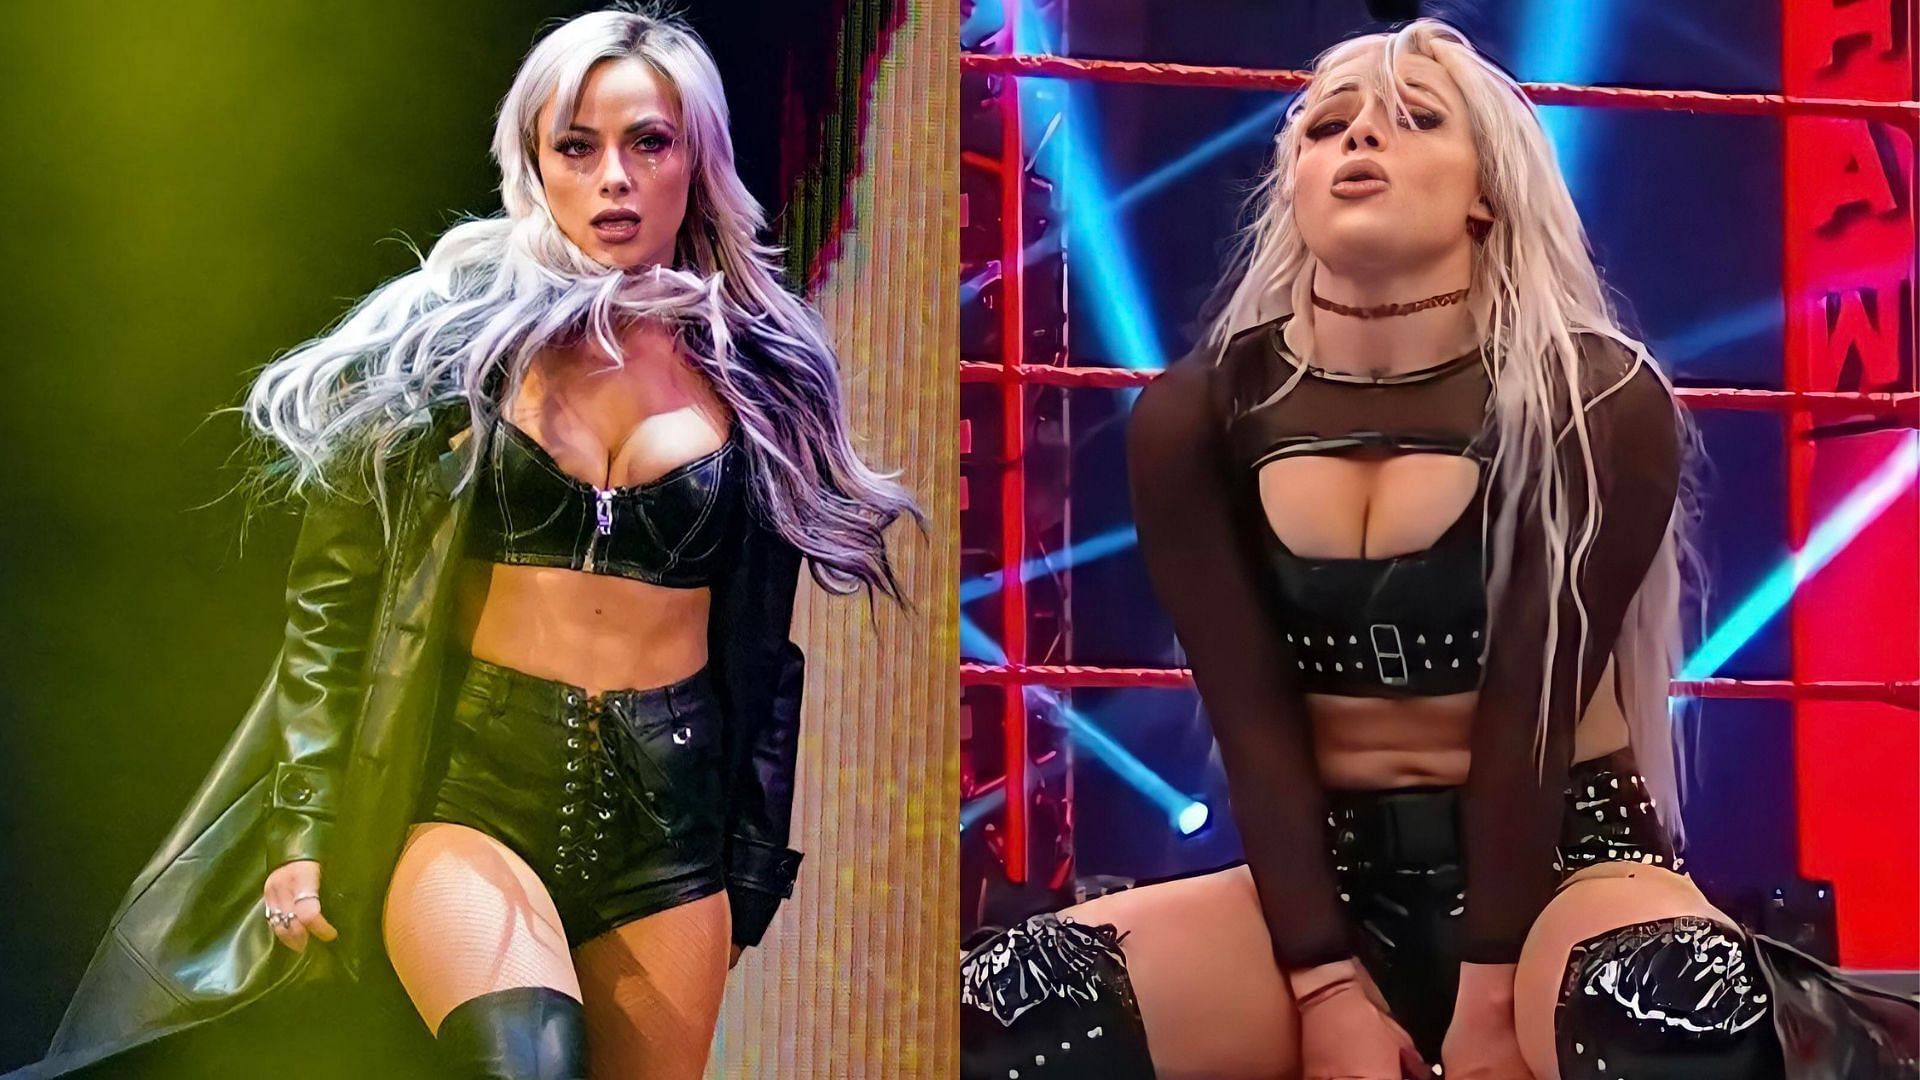 Liv Morgan is set to participate in the Women